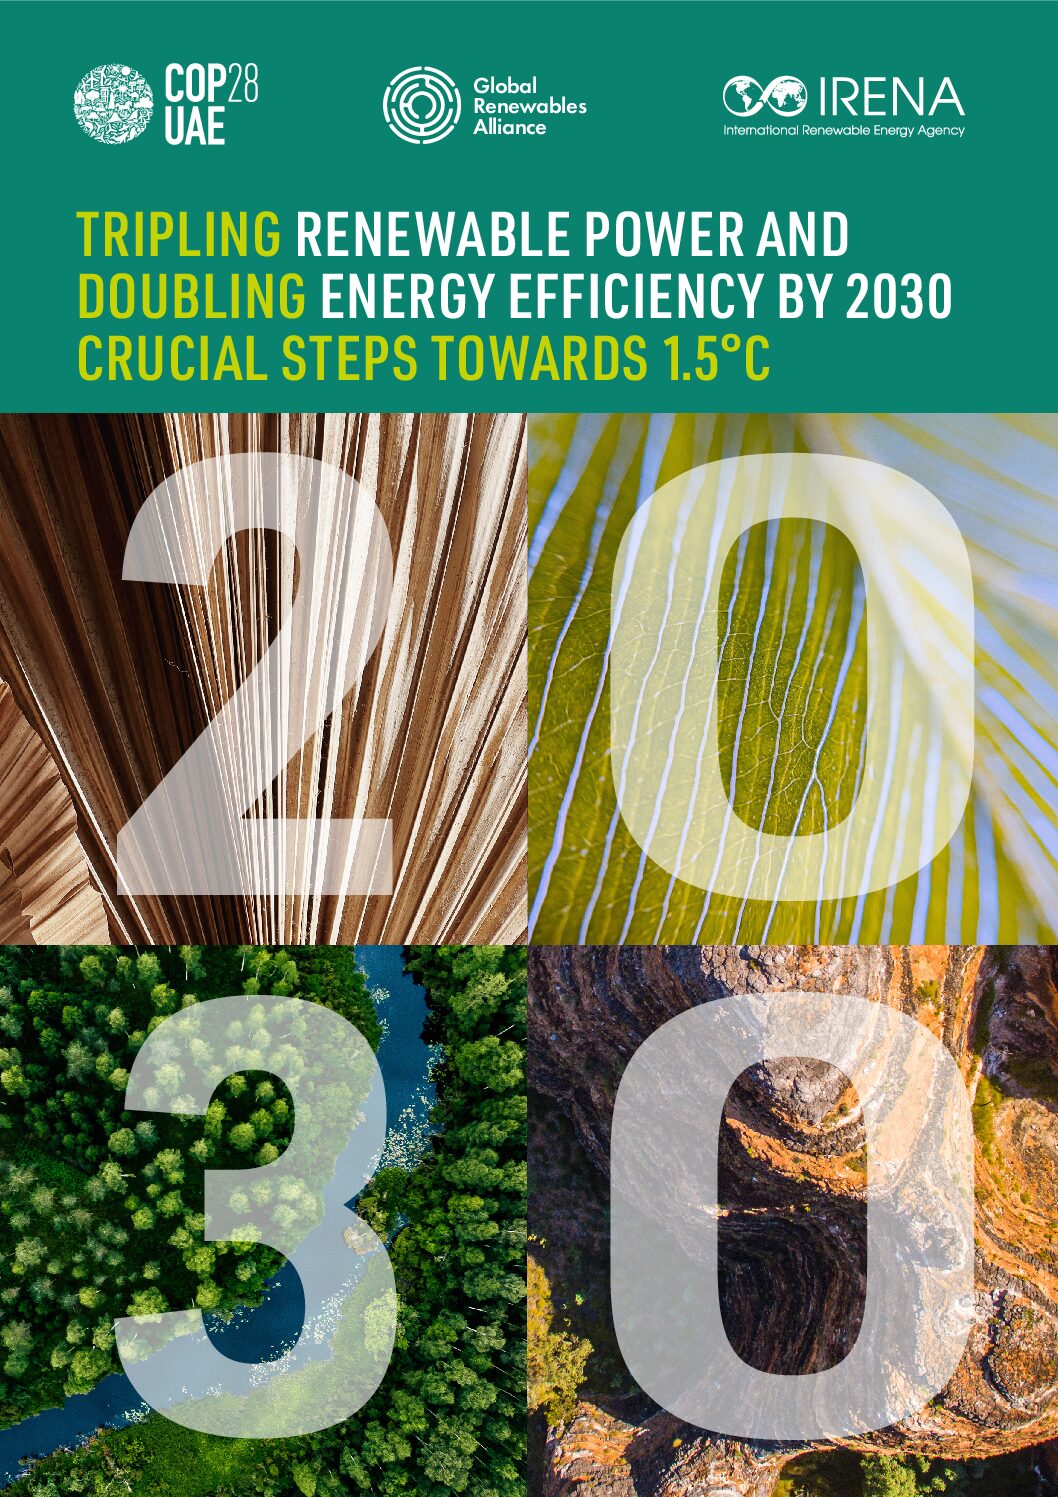 Tripling Renewable Power and Doubling Energy Efficiency by 2030 Crucial Steps Towards 1.5°